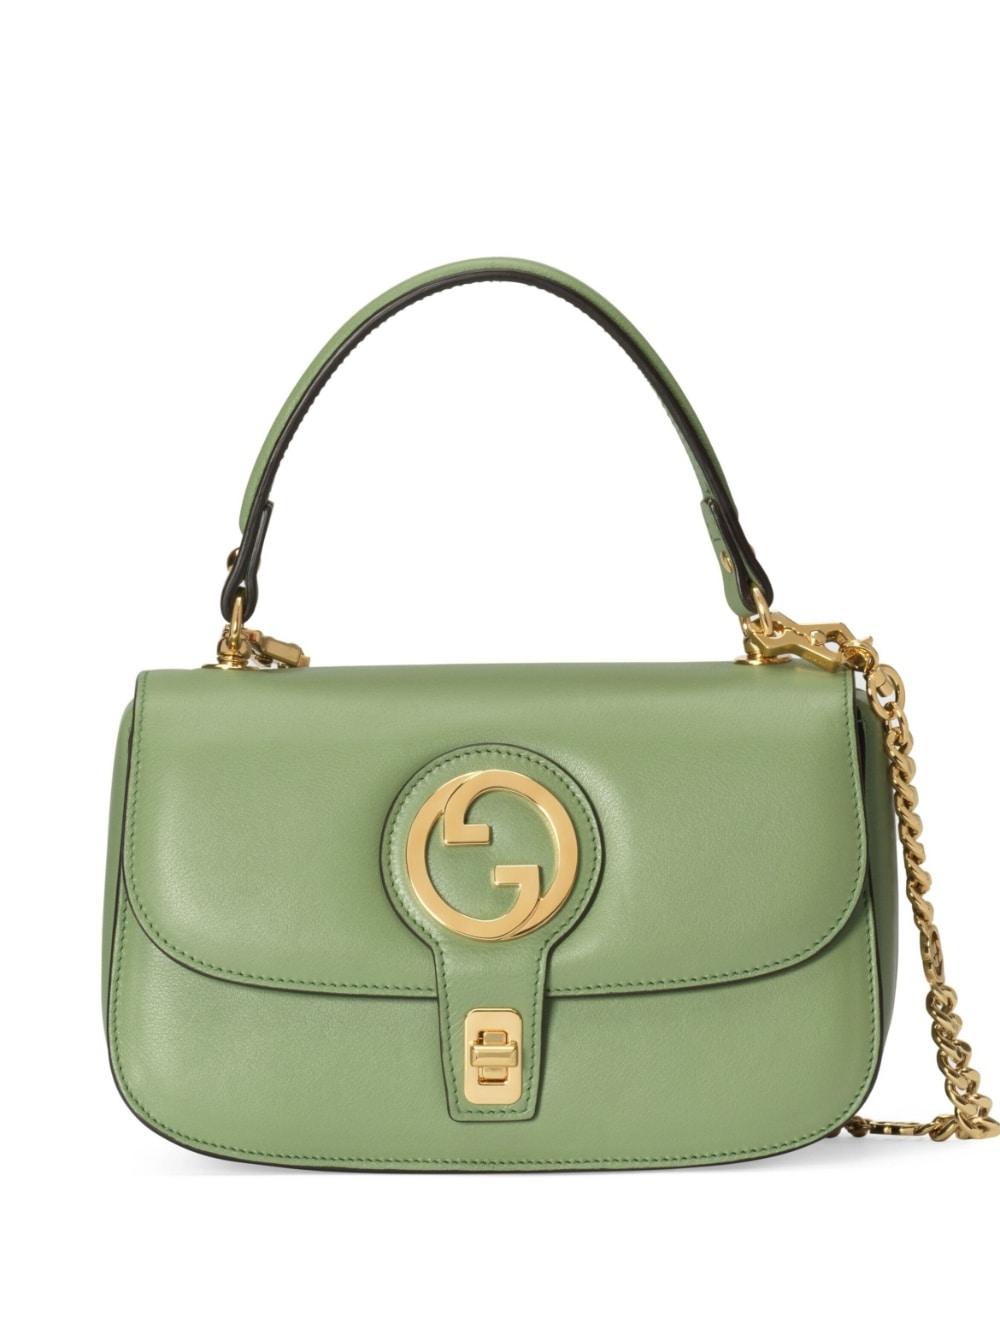 Gucci Blondie Leather Shoulder Bag in Green | Lyst